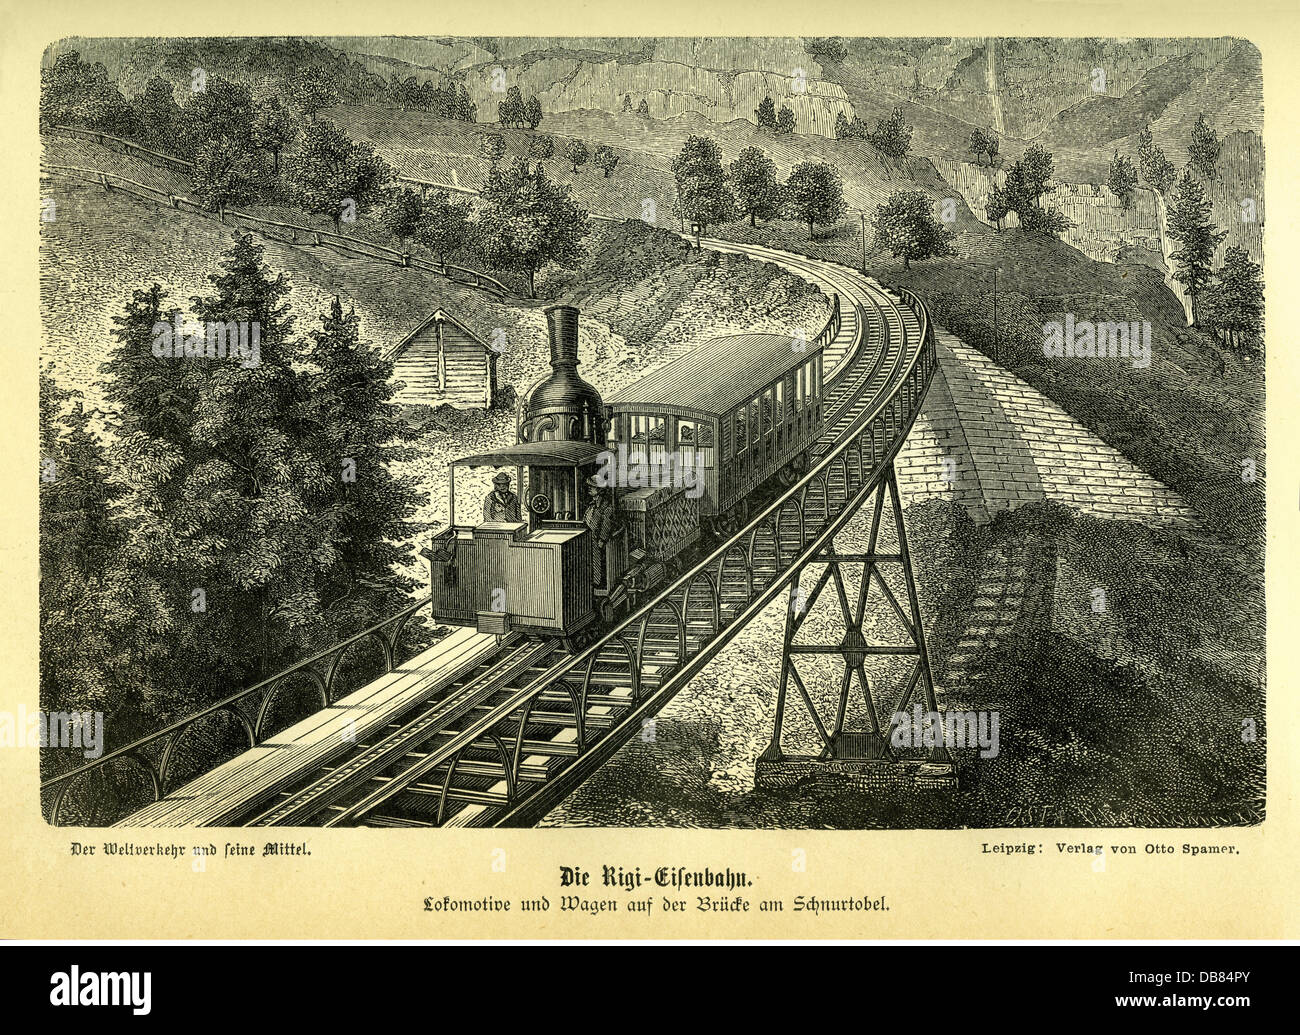 transport / transportation,railway,the Rigi train,locomotive and carriages on the bridge on Schnurtobel,Schnurtobel Bridge,Vitznau-Rigi Train,first rack-railway in Europe,first mountain railway in Europe,planned by engineer Niklaus Riggenbach,opening: 1871,wood engraving,Switzerland,circa 1881,Rigi Train,single-track,single-track course,train,trains,upward slope,upward slopes,Alps,gear wheel,gearwheel,gear wheels,rack-railway,rack-railroad,vertical steam drum,mountain,peak,peaks,mounts,mount,public transport,public transportatio,Additional-Rights-Clearences-Not Available Stock Photo